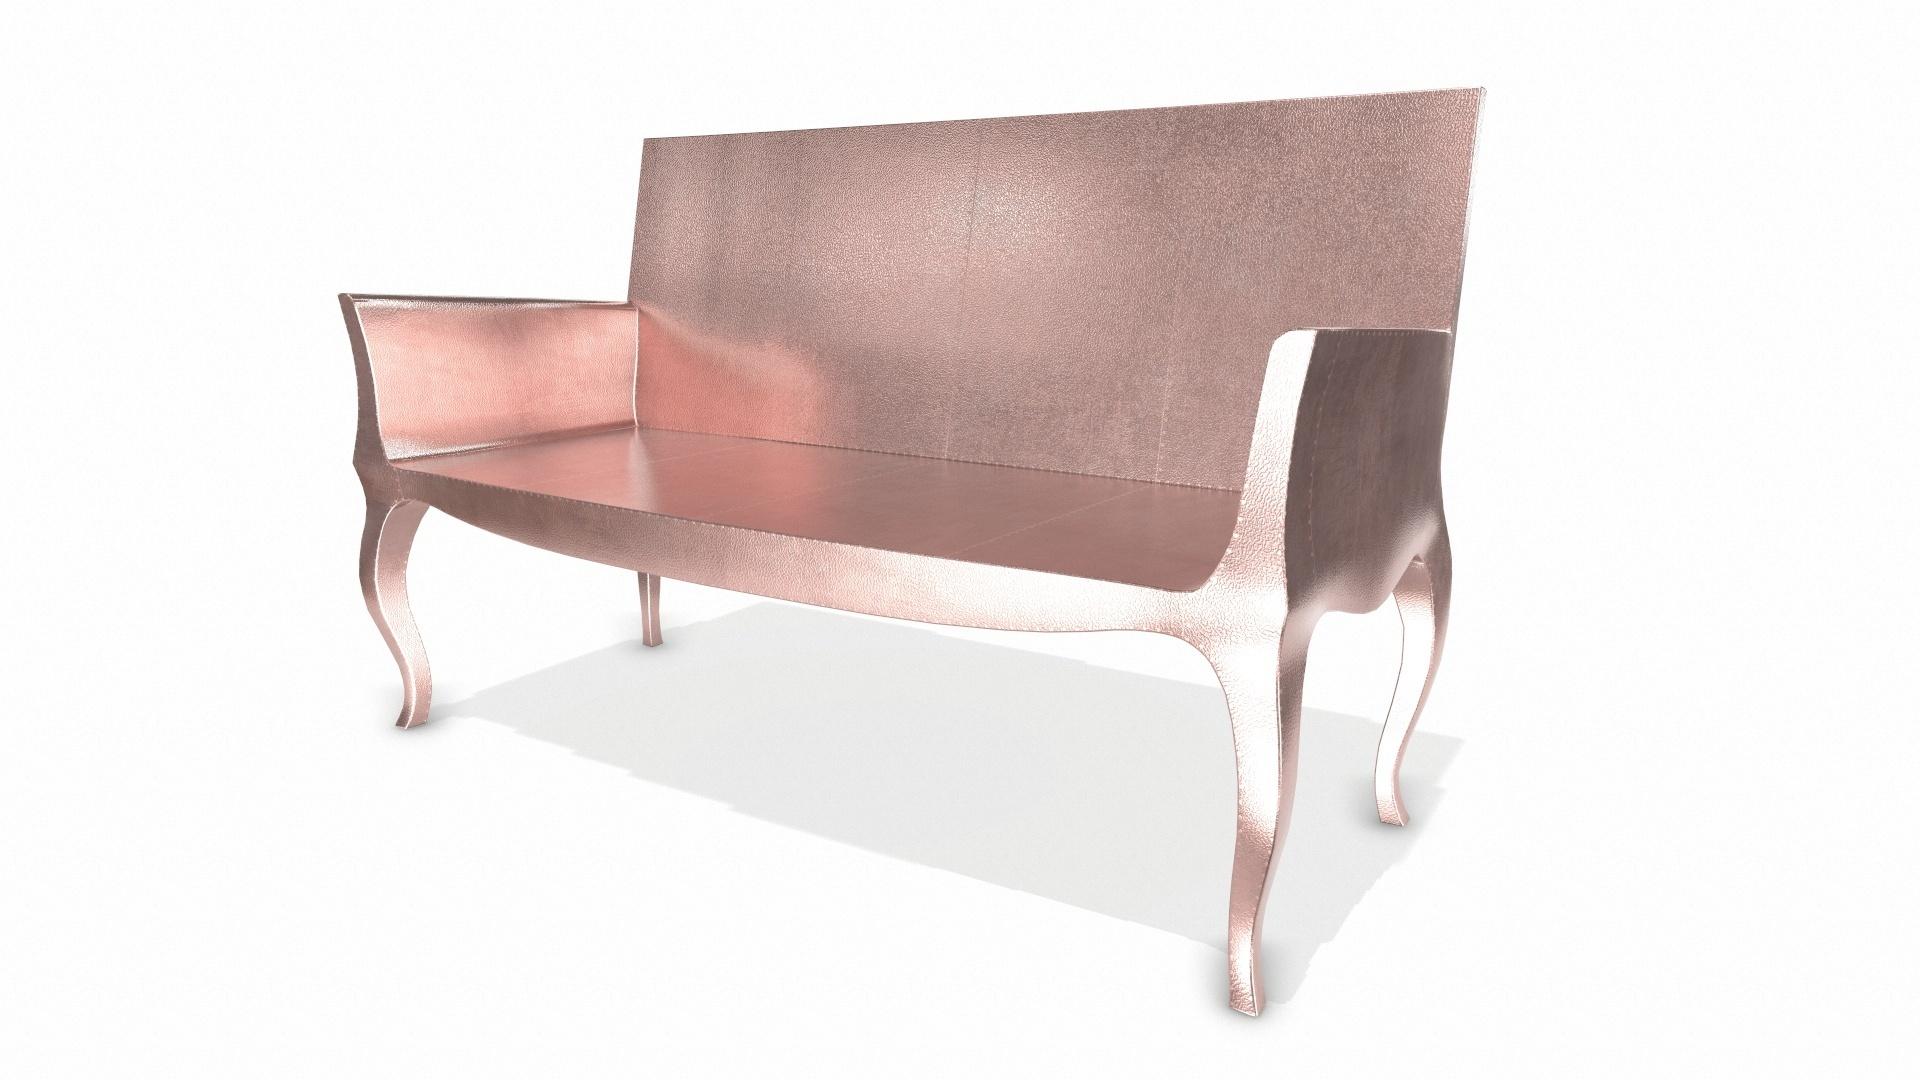 American Louise Settee Art Deco Canapes in Fine Hammered Copper by Paul Mathieu For Sale